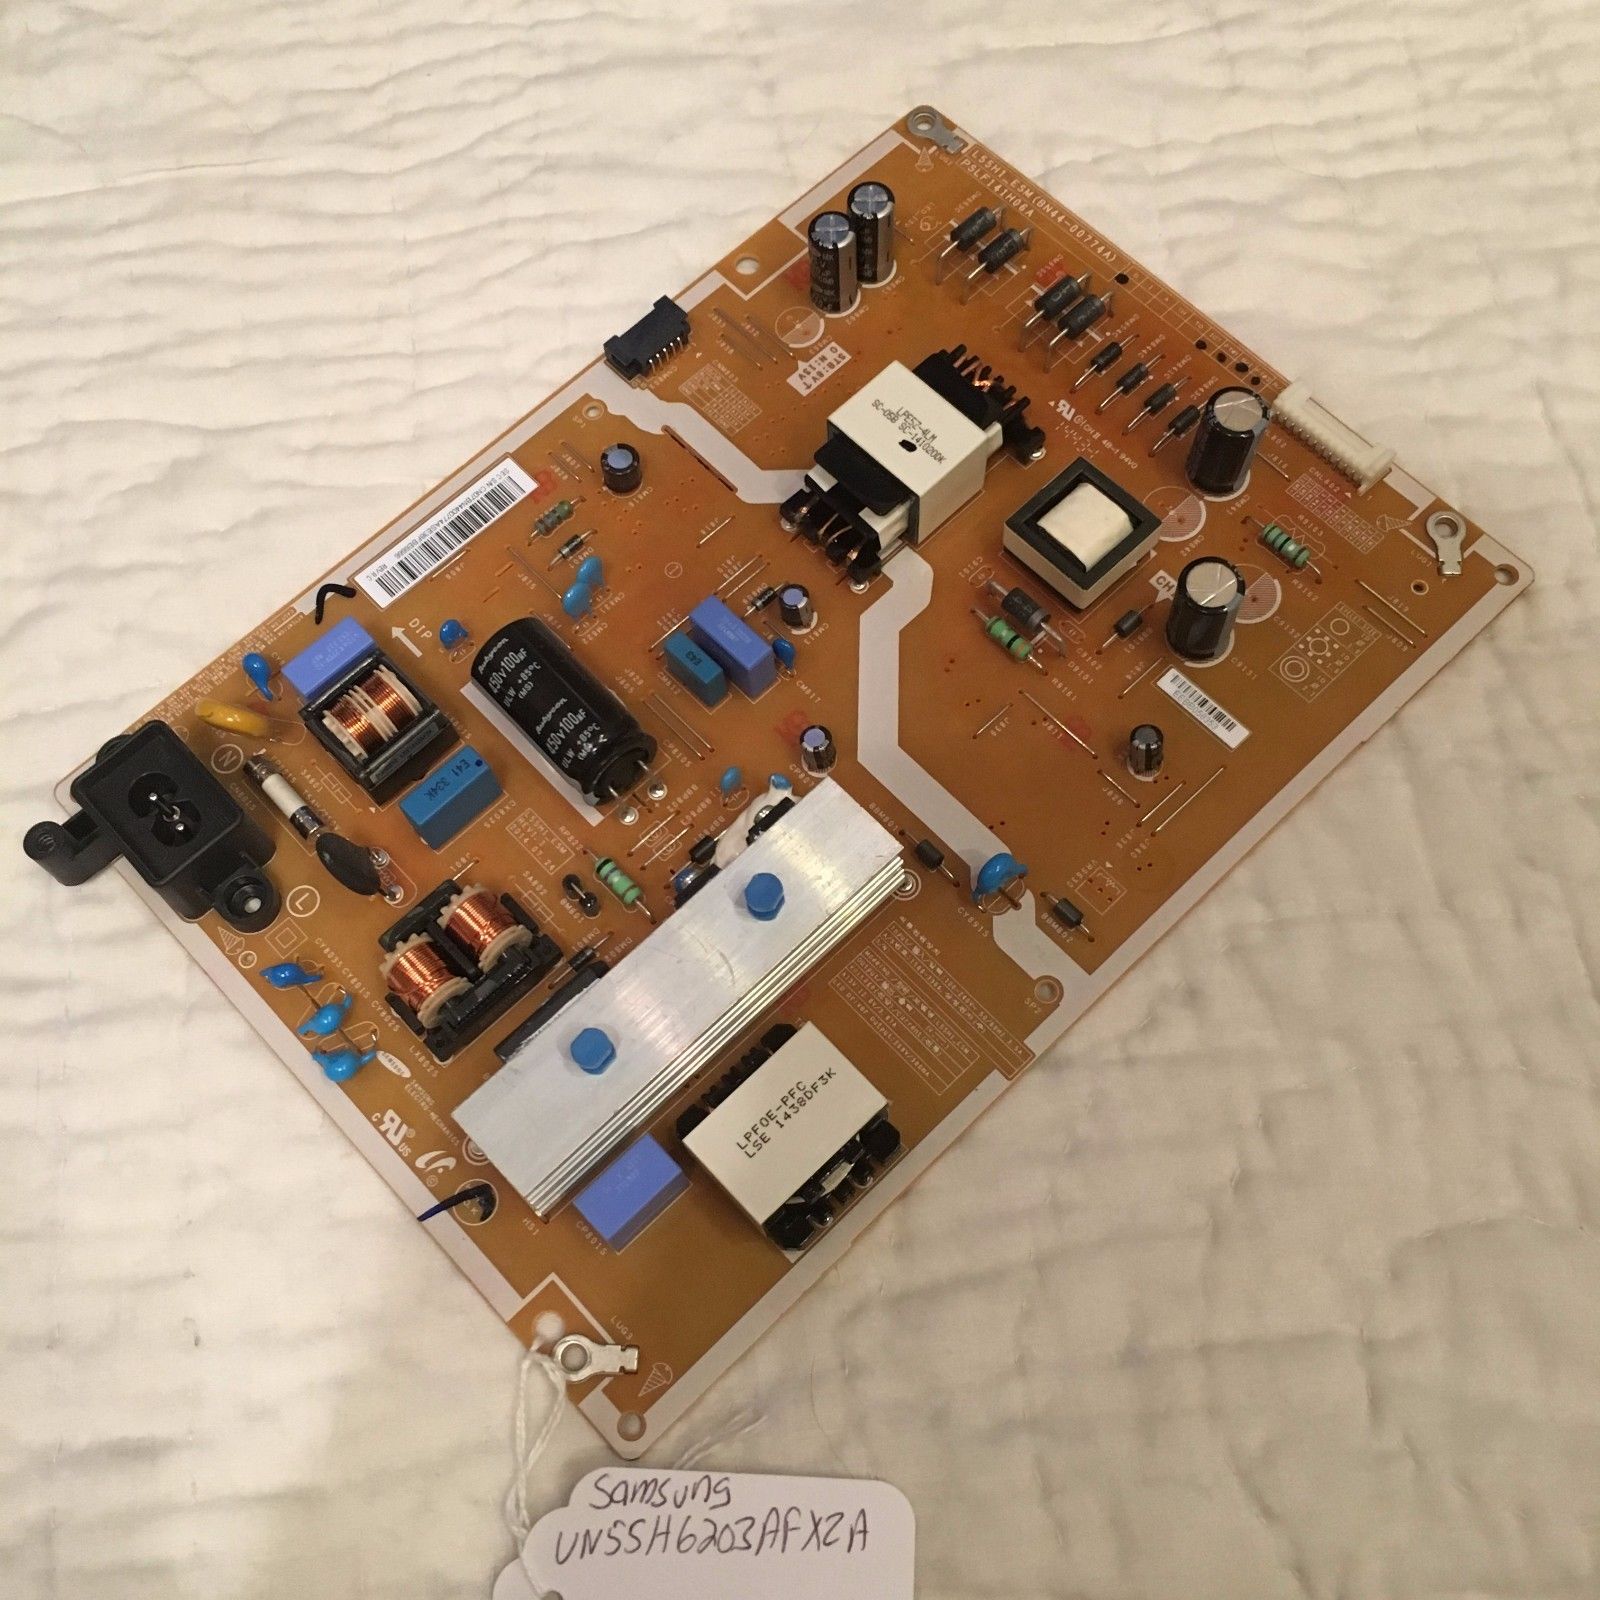 SAMSUNG BN44-00774A POWER SUPPLY BOARD FOR UN60J6200A AND OTHER